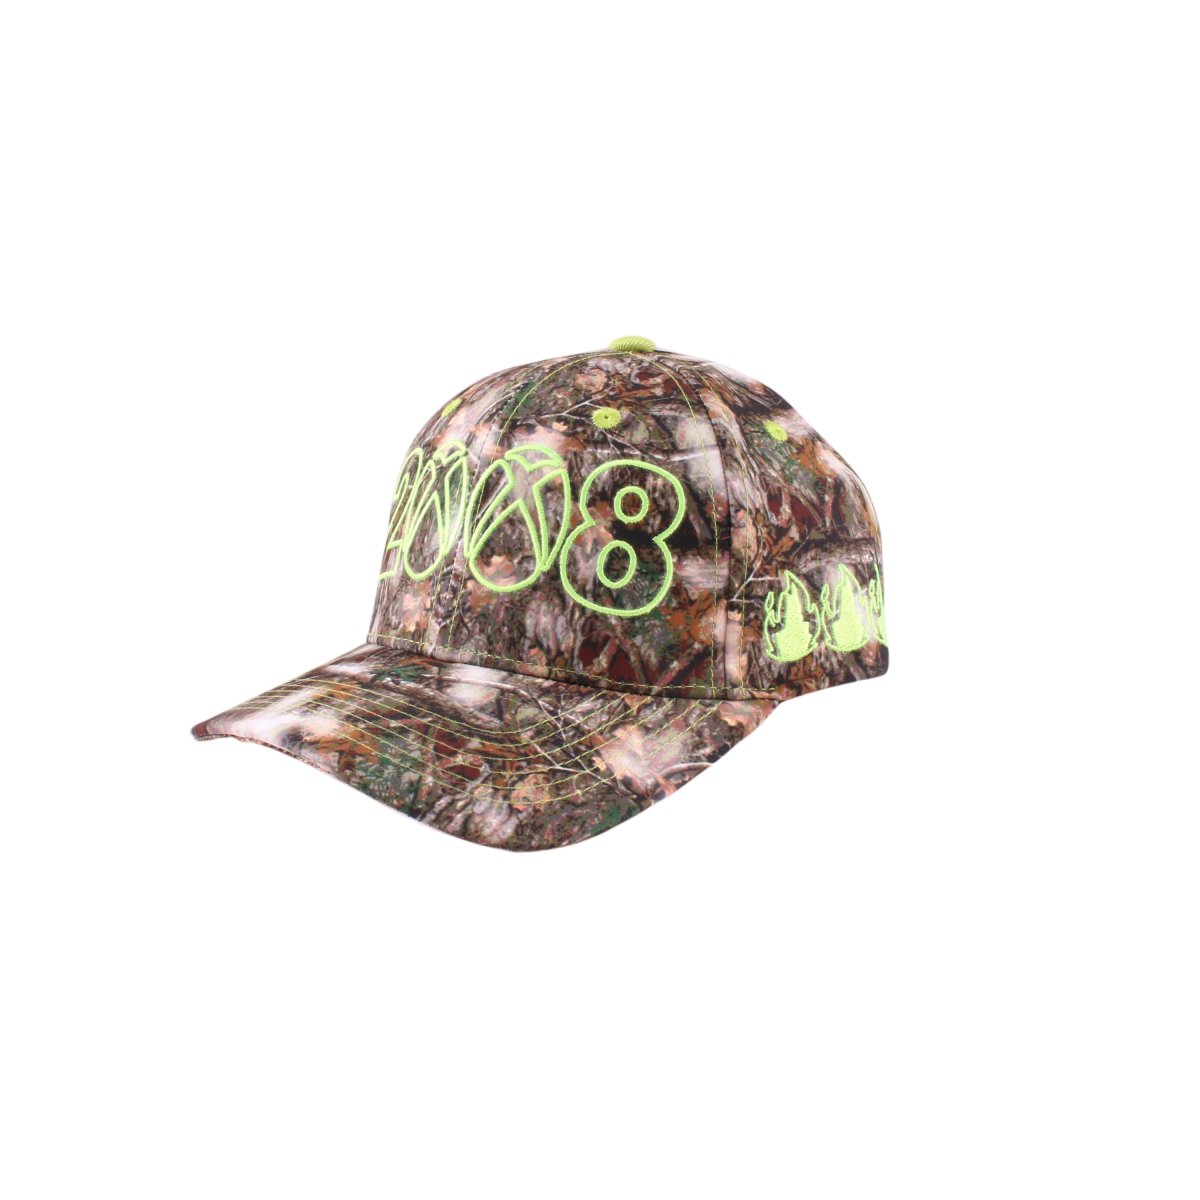 8BOXREALTREE HAT 【WHITE/GREEN】